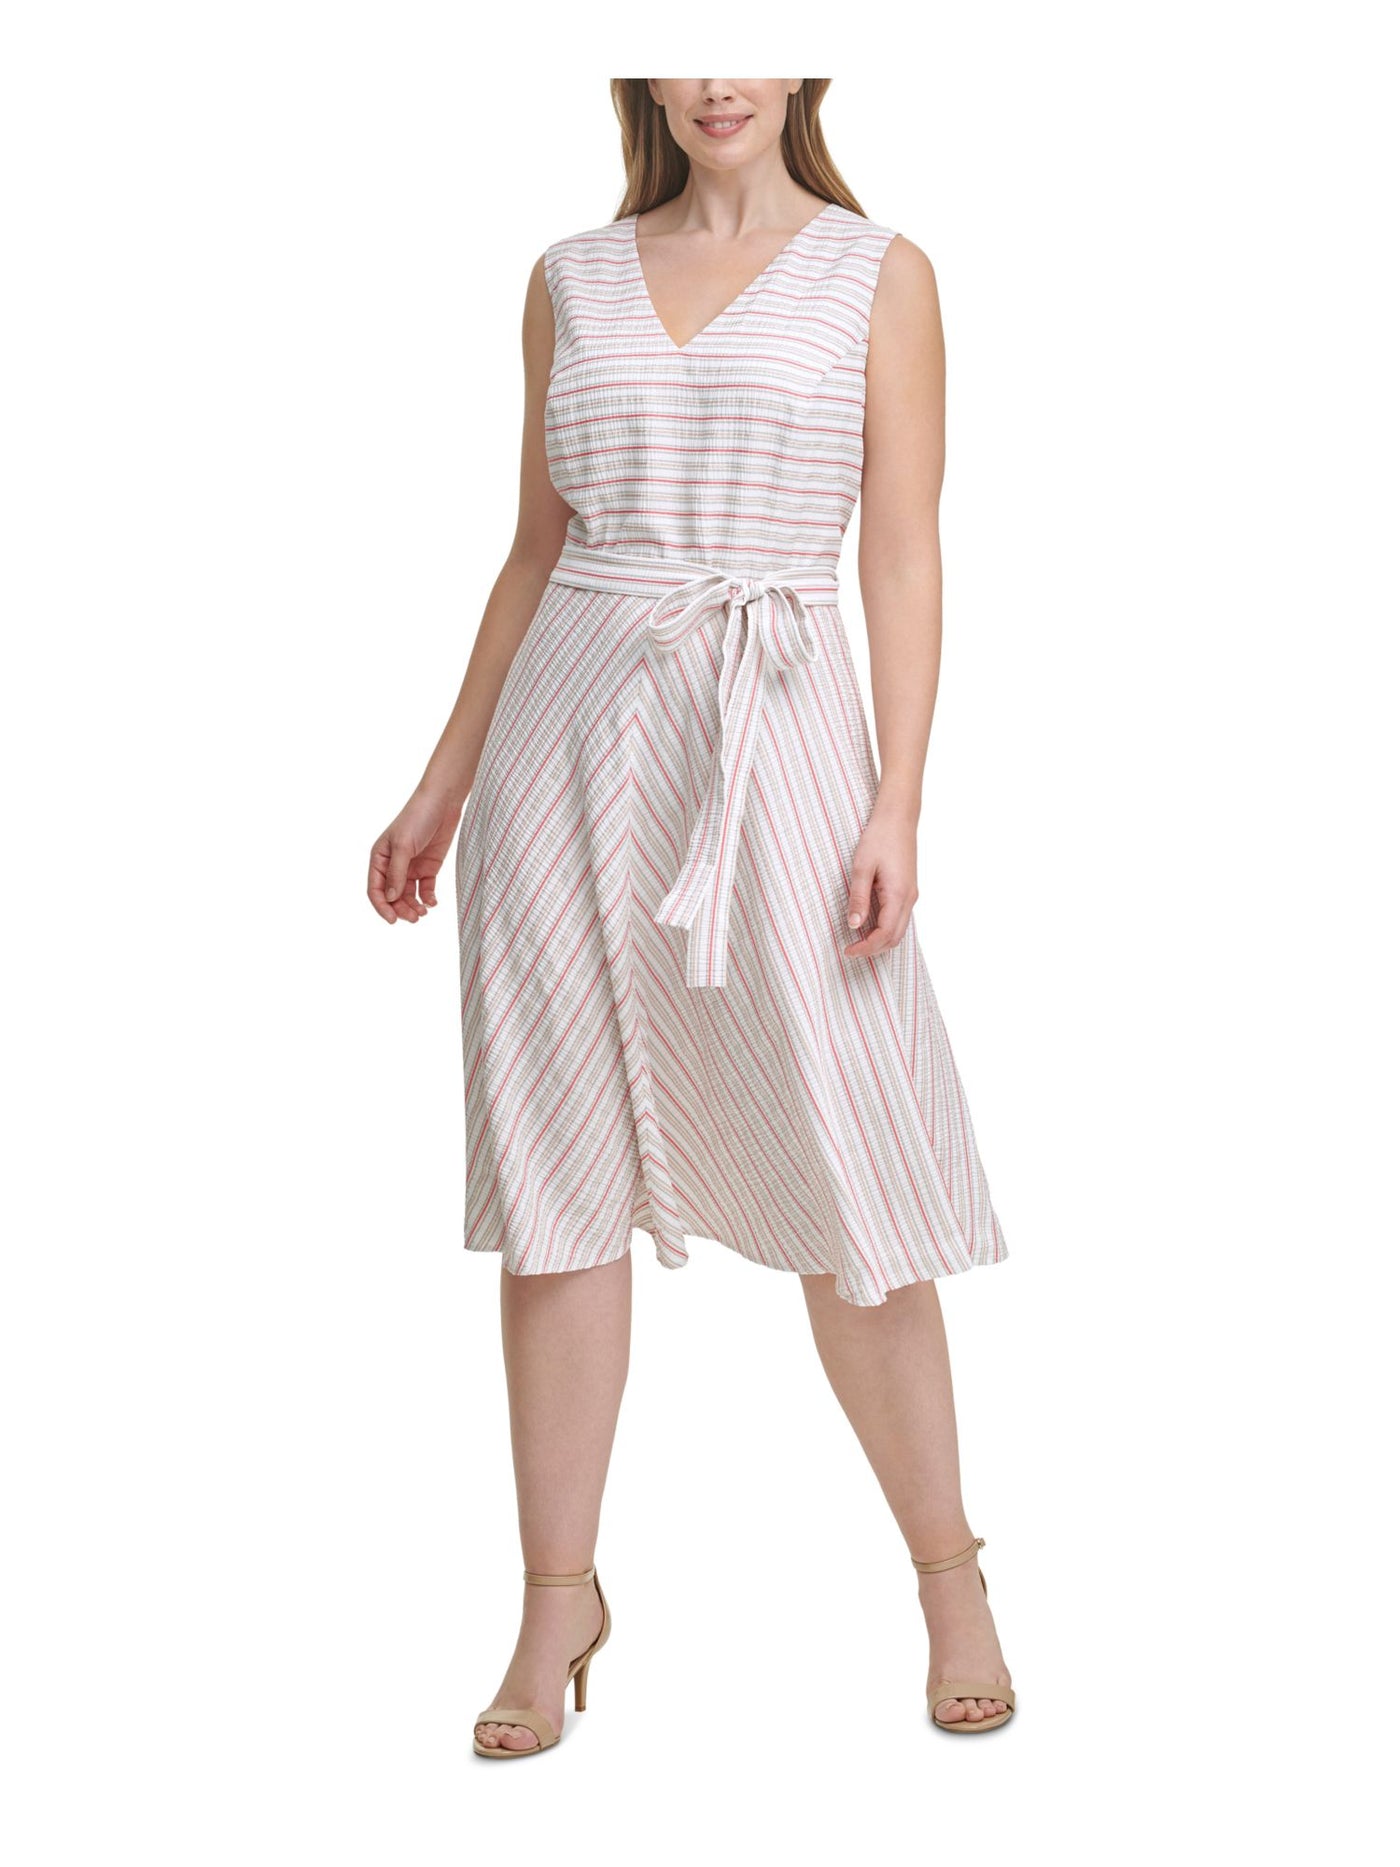 TOMMY HILFIGER Womens White Zippered Tie Striped Sleeveless V Neck Below The Knee Fit + Flare Dress Plus 18W